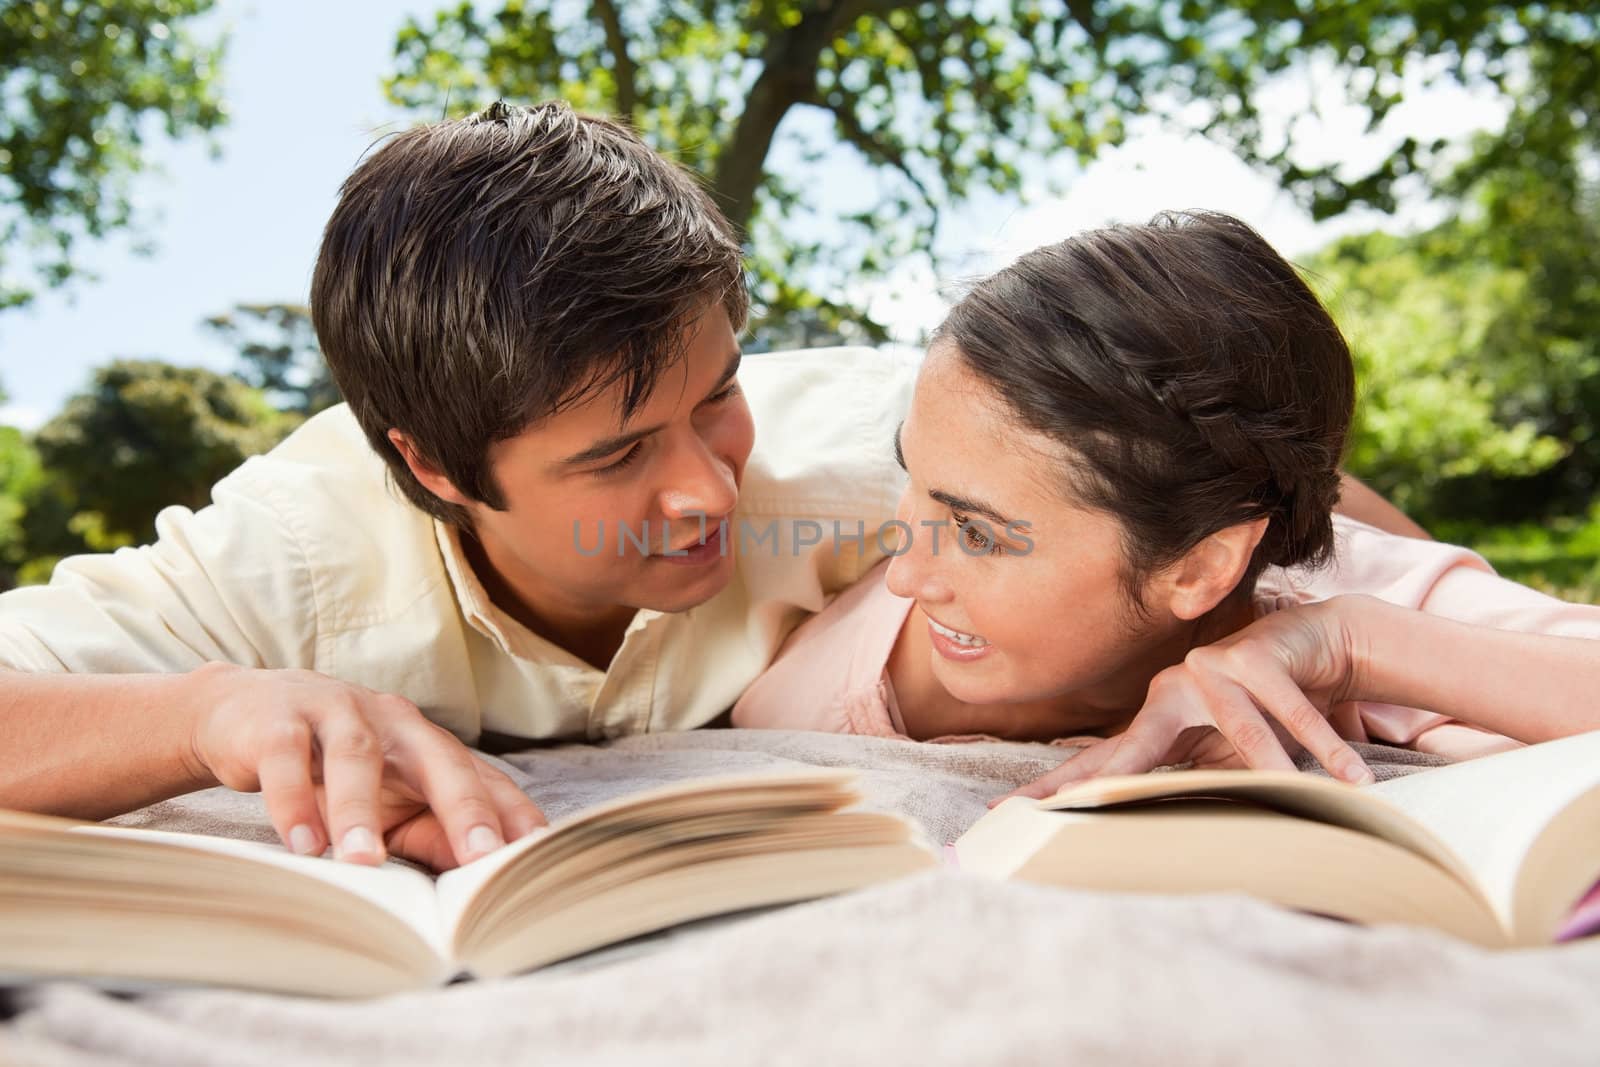 Two friends looking at each other while reading books on a blank by Wavebreakmedia